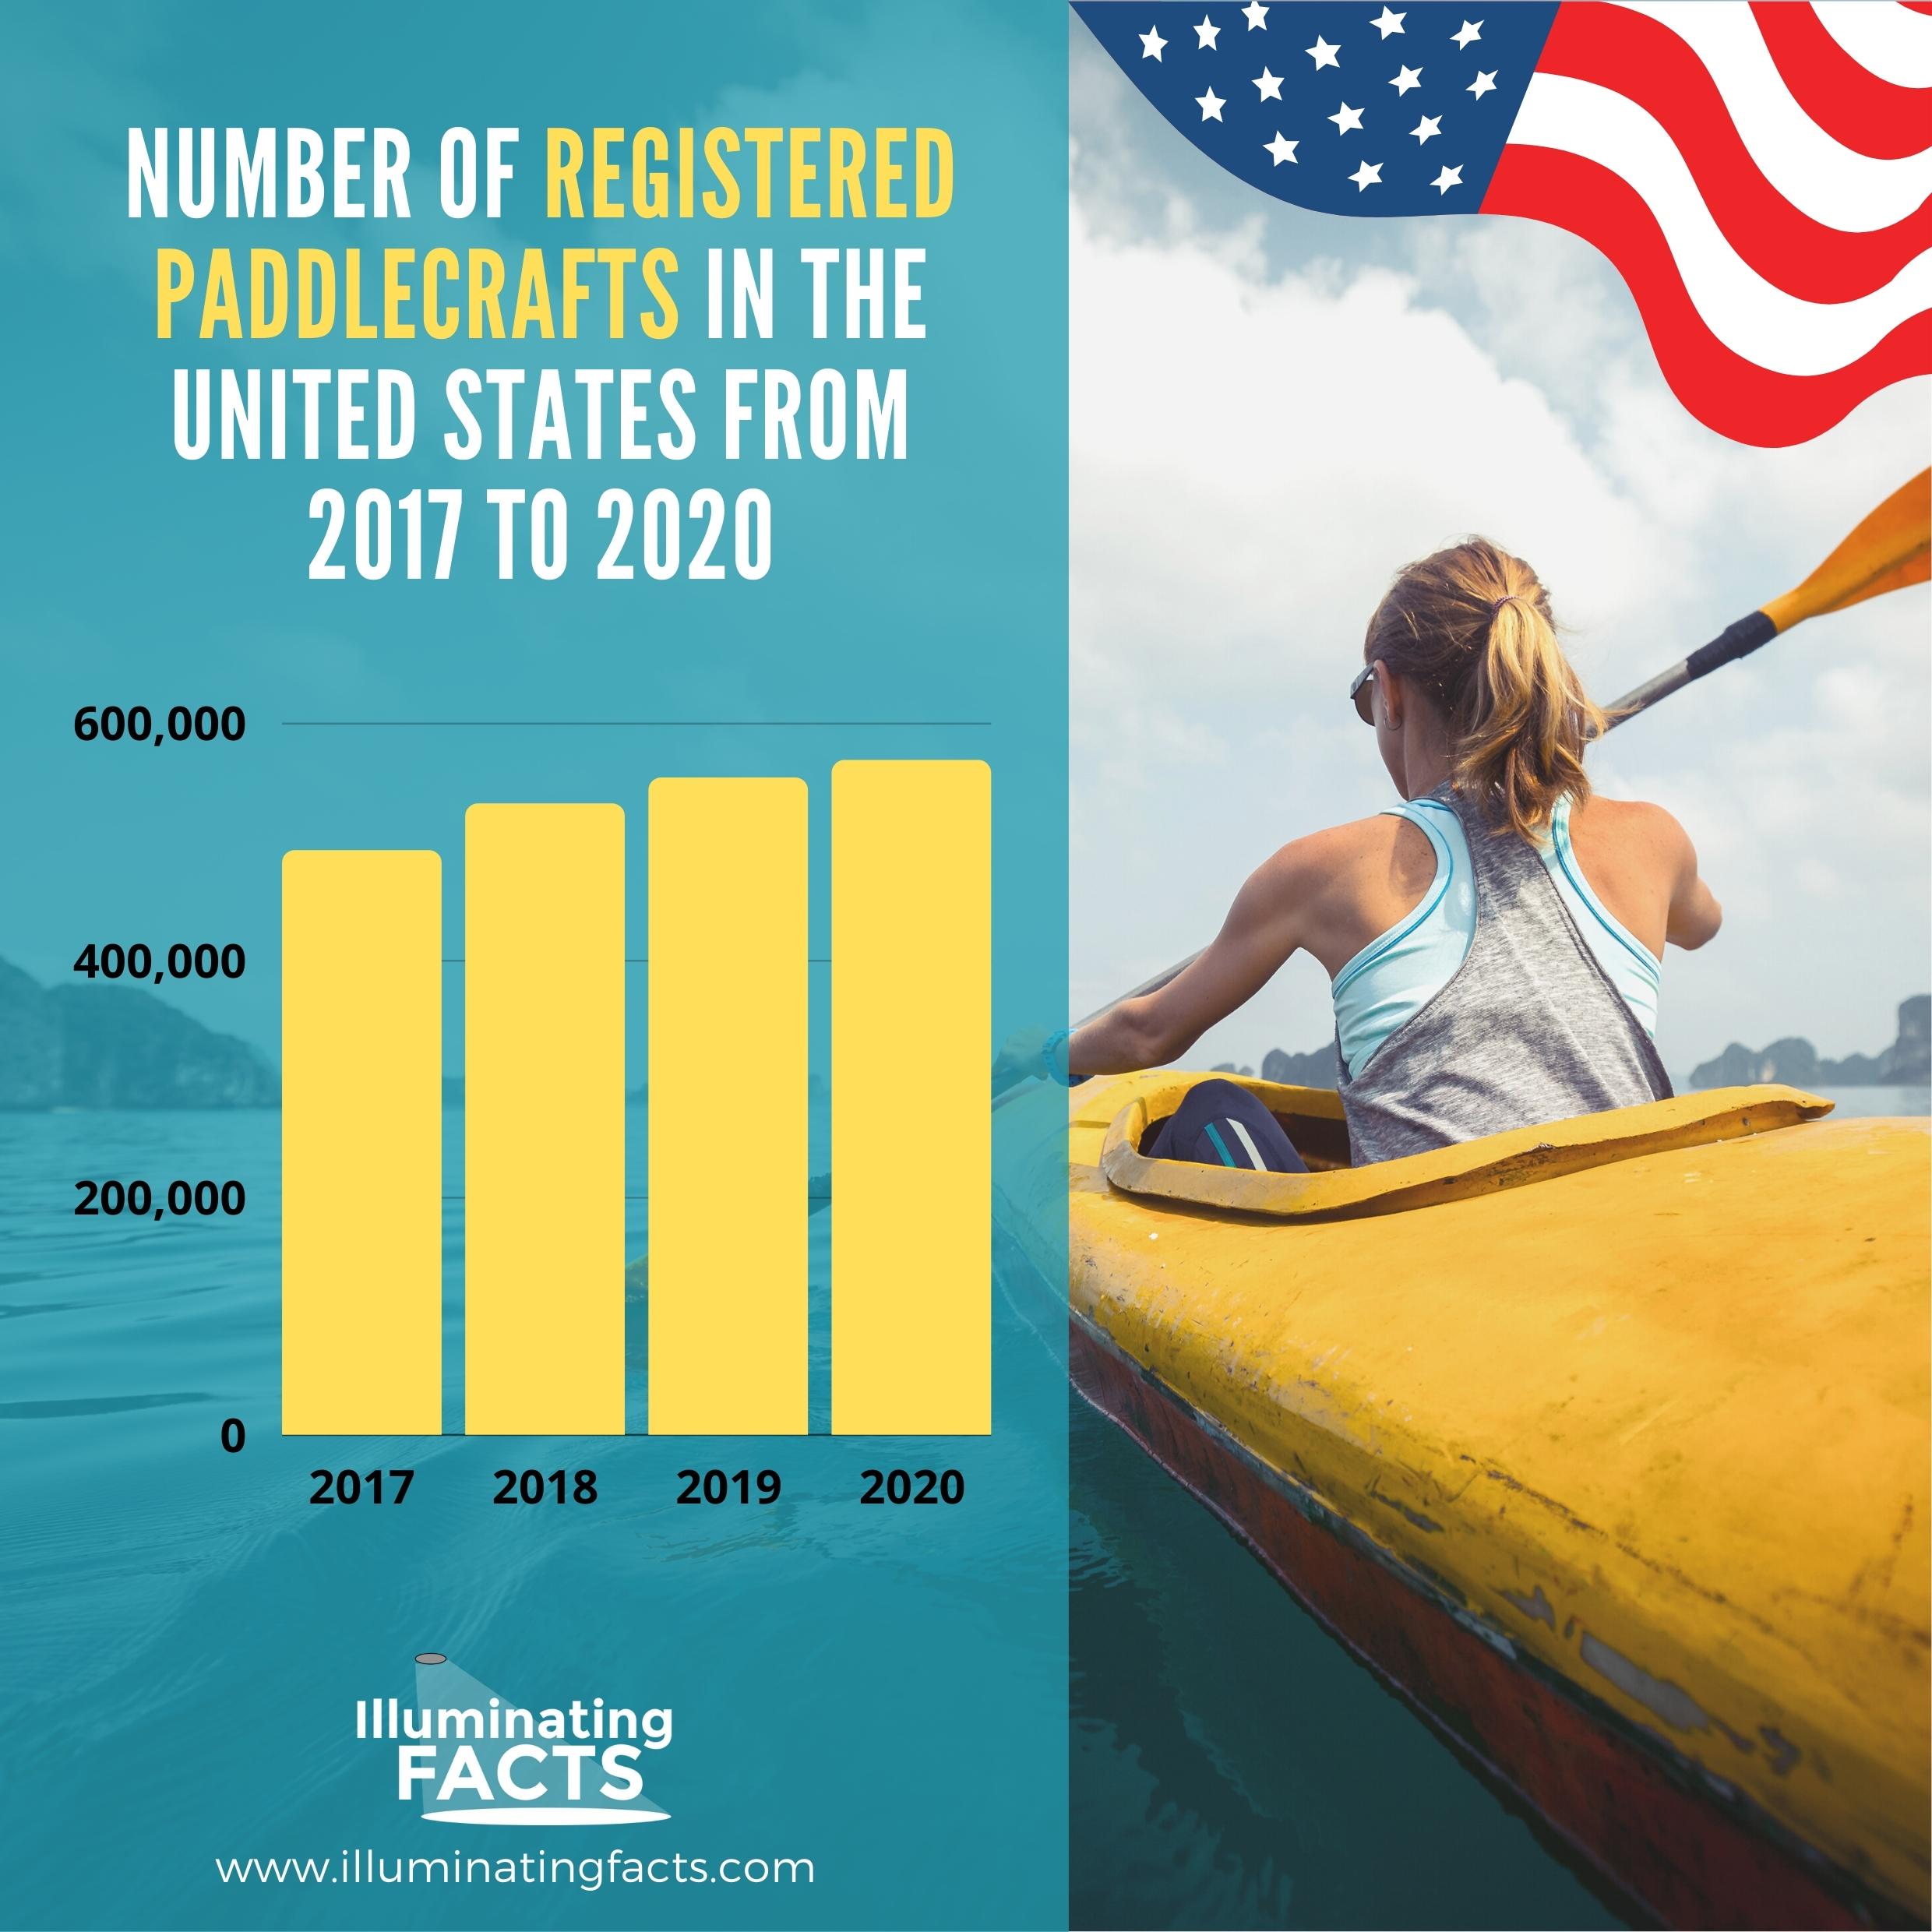 Number of registerd paddlecrafts in the US from 2017 to 2020